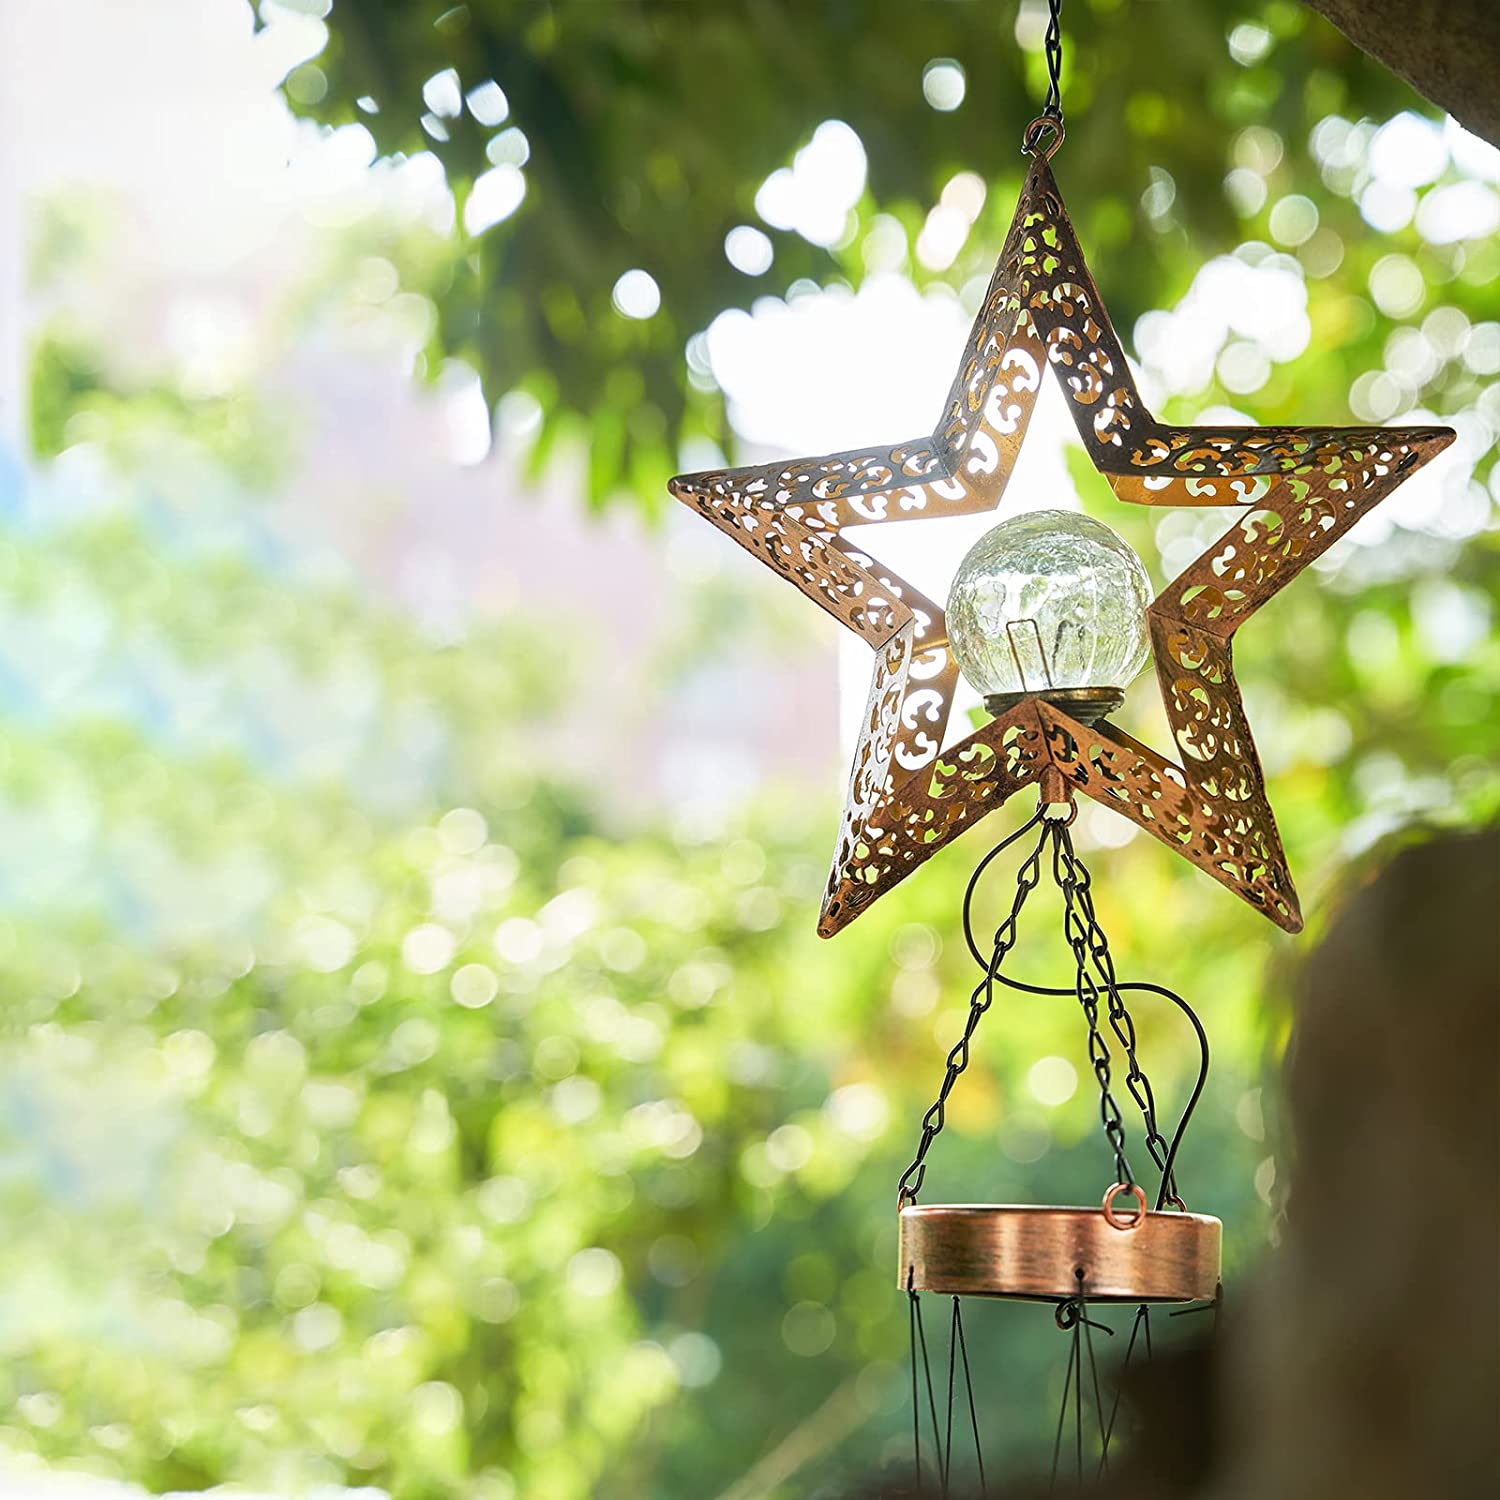 Solar Metal Star Wind Chime Outdoor Waterproof Hanging Crackle Glass Ball Lights Memorial Star Windchimes Decoration Garden Home Lawn Patio Unique Decor Gifts